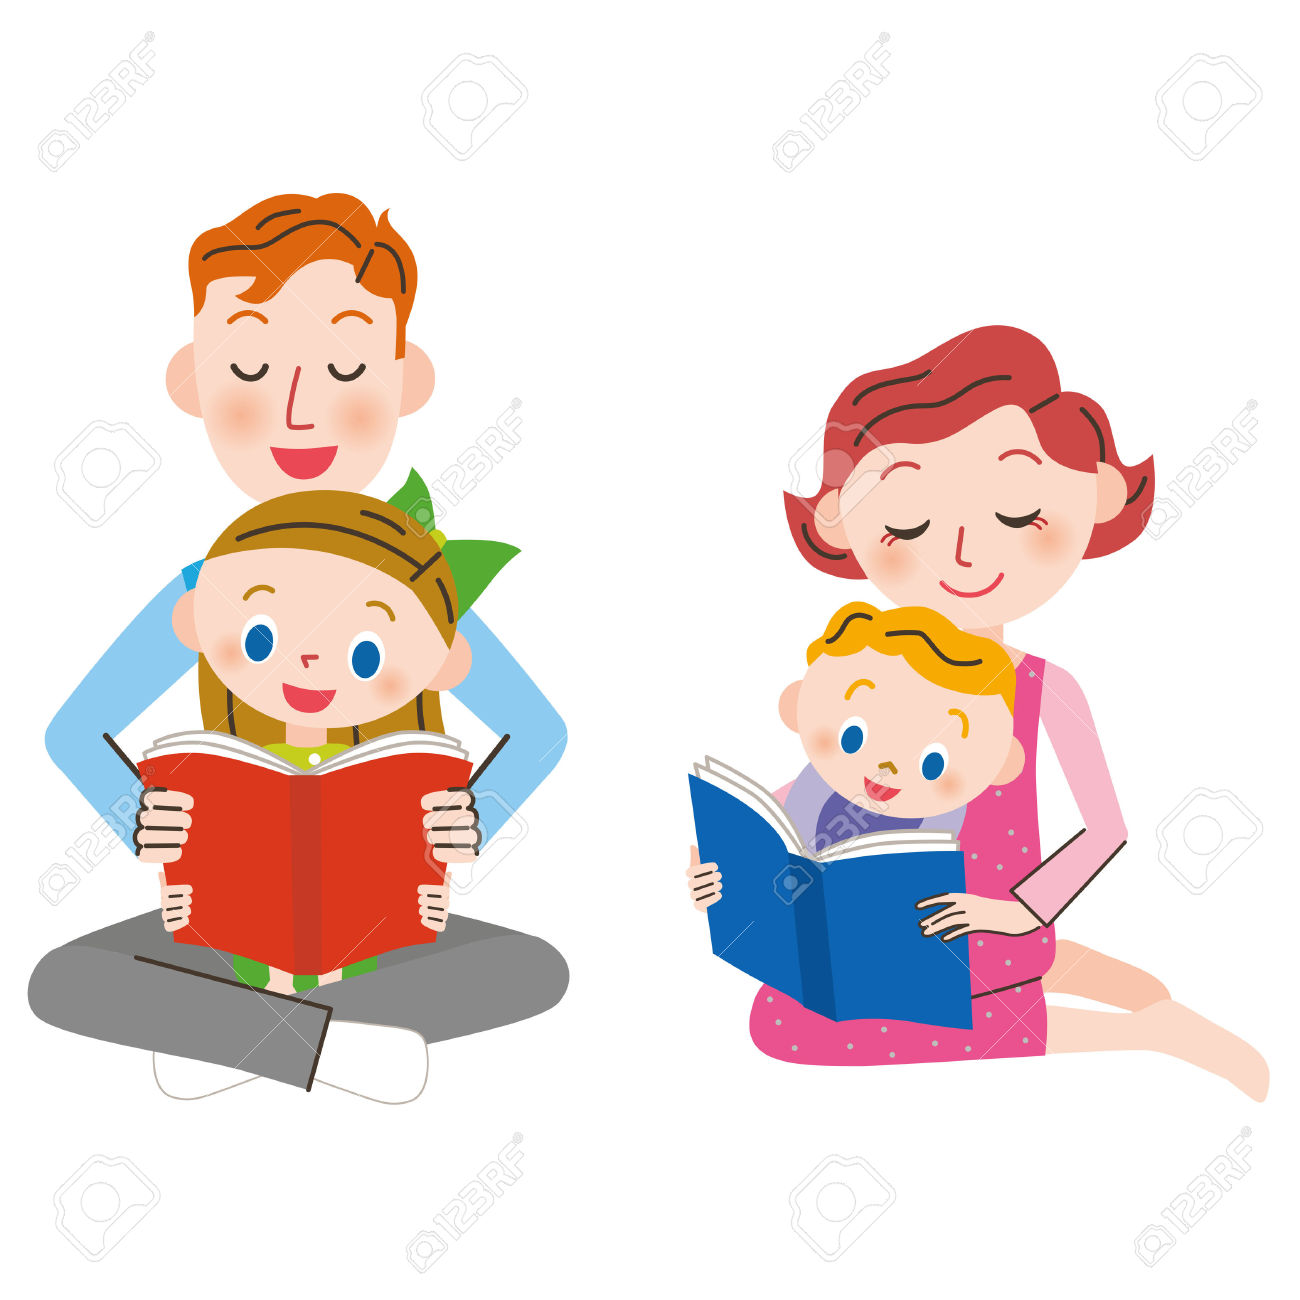 50,822 Parents And Children Stock Vector Illustration And Royalty.